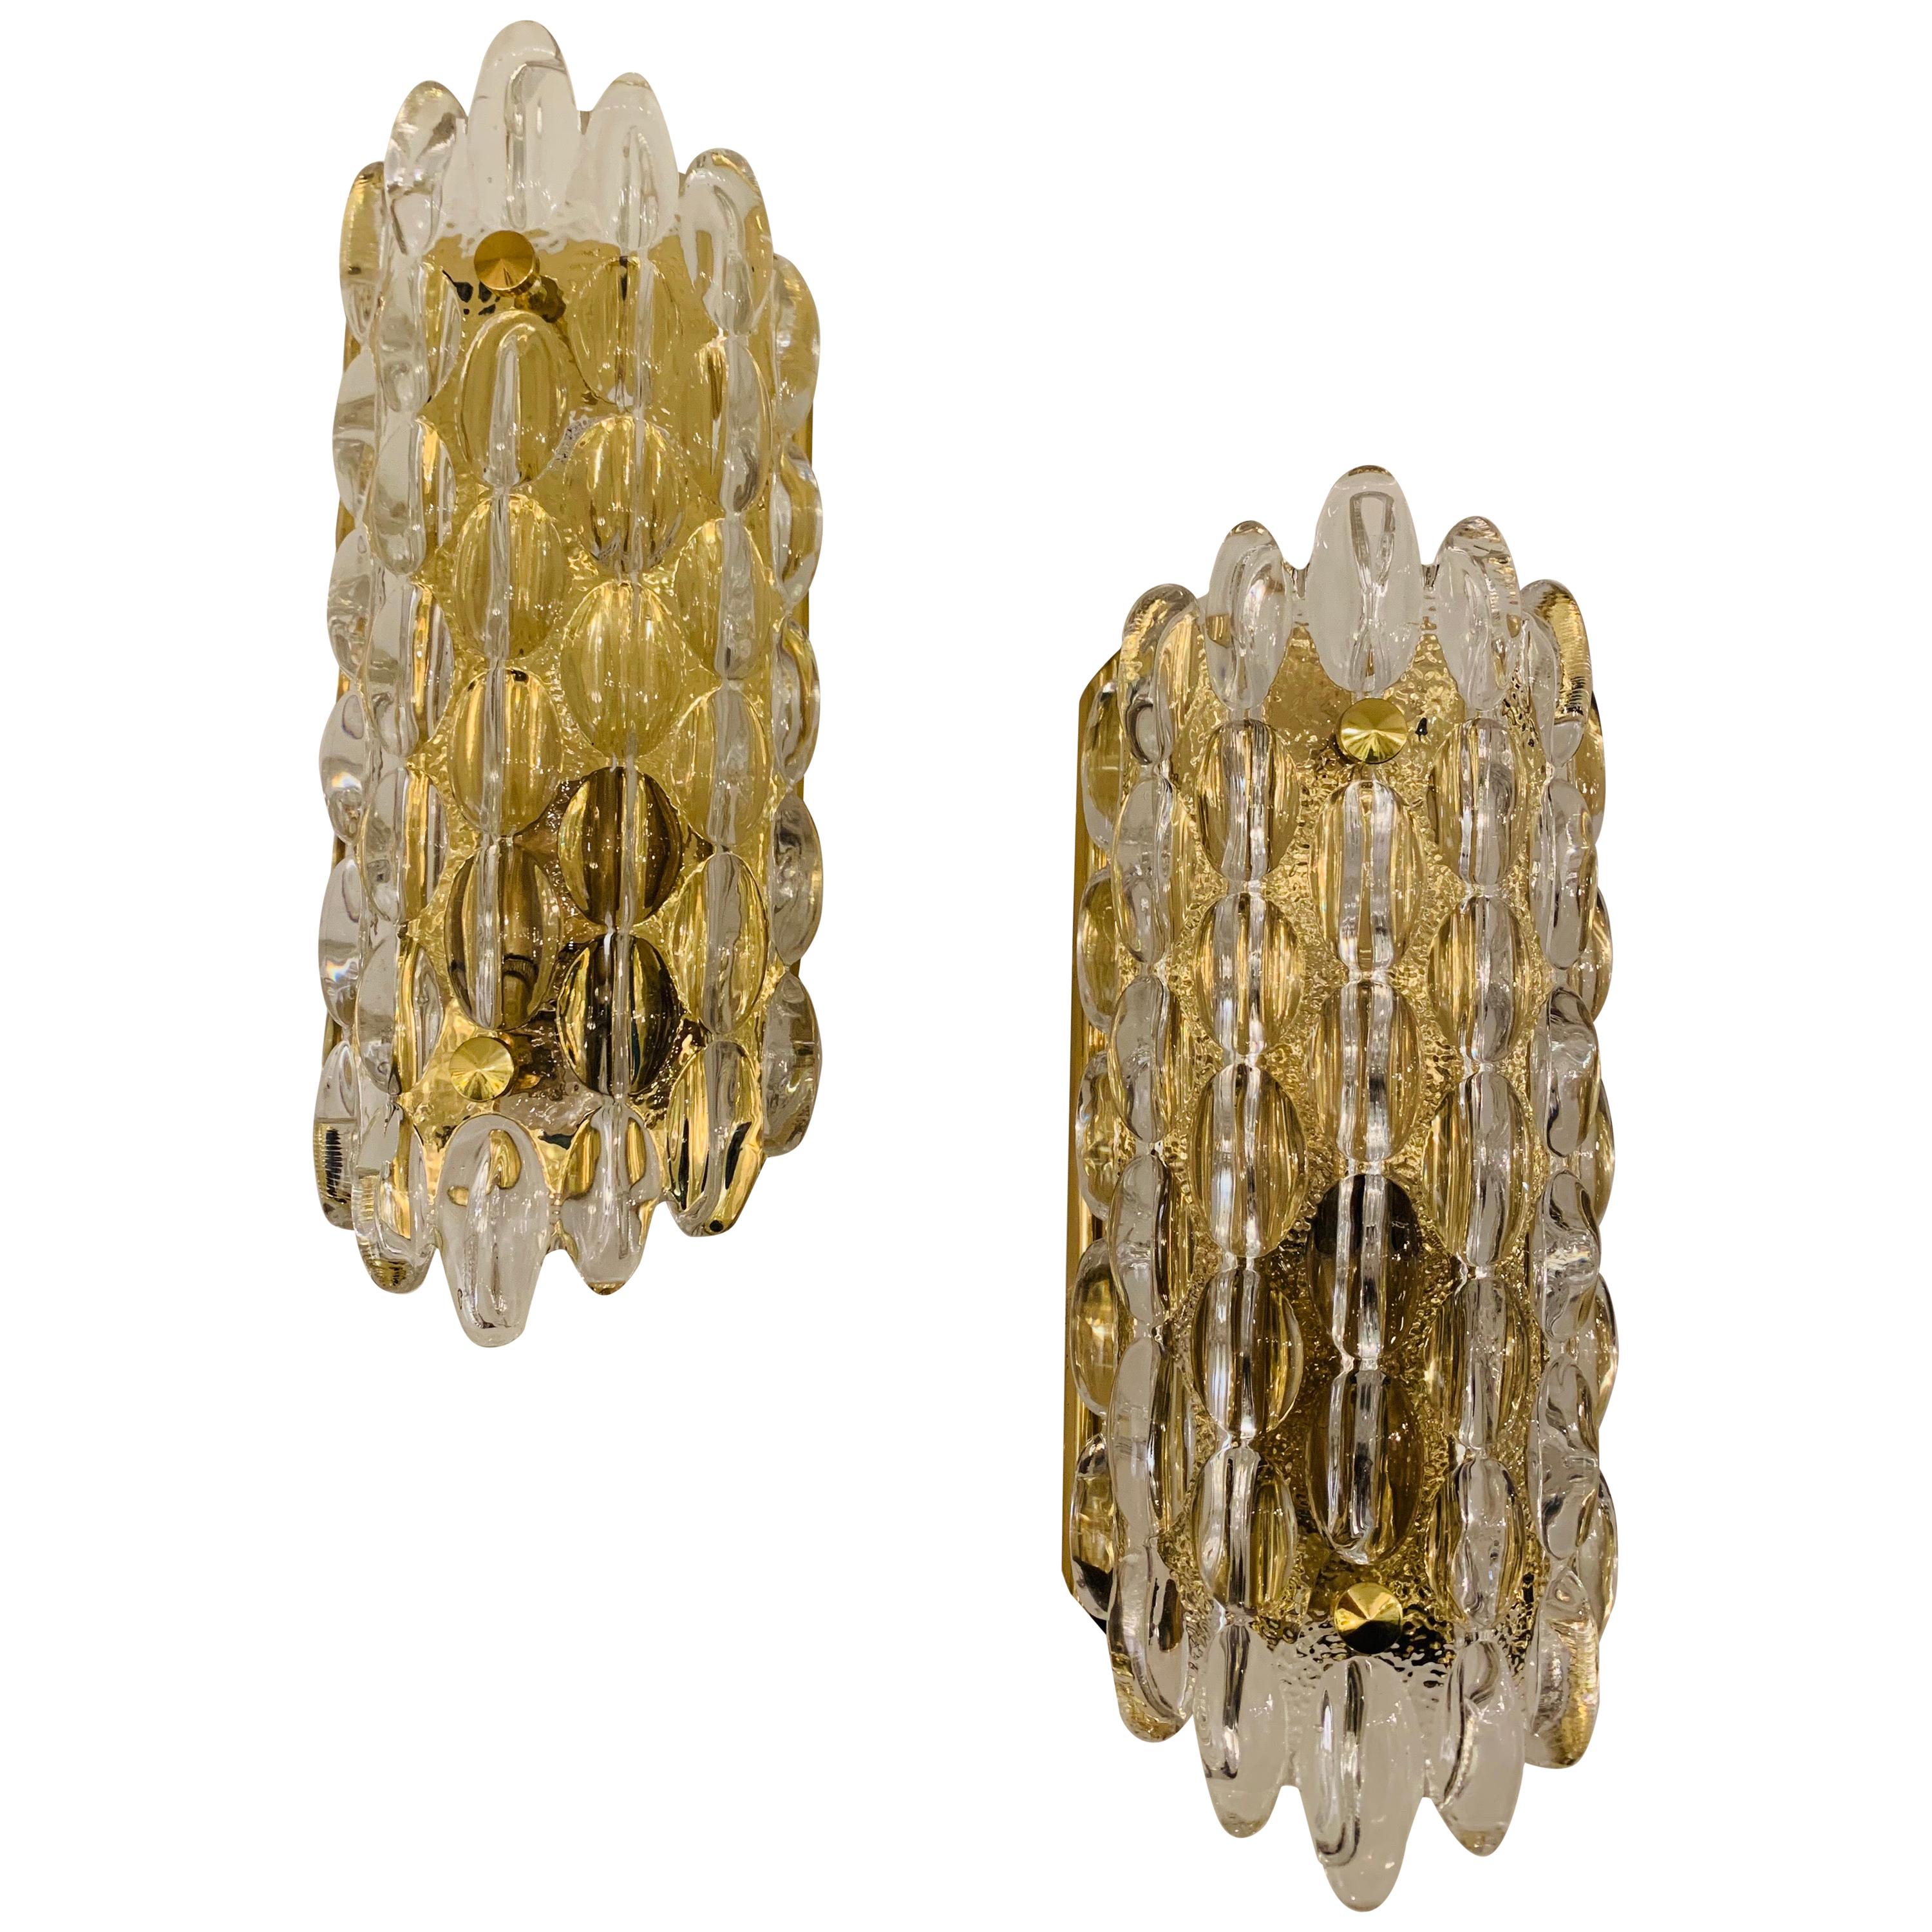 Pair of Karl Fagerland Orrefors Crystal Wall Lights